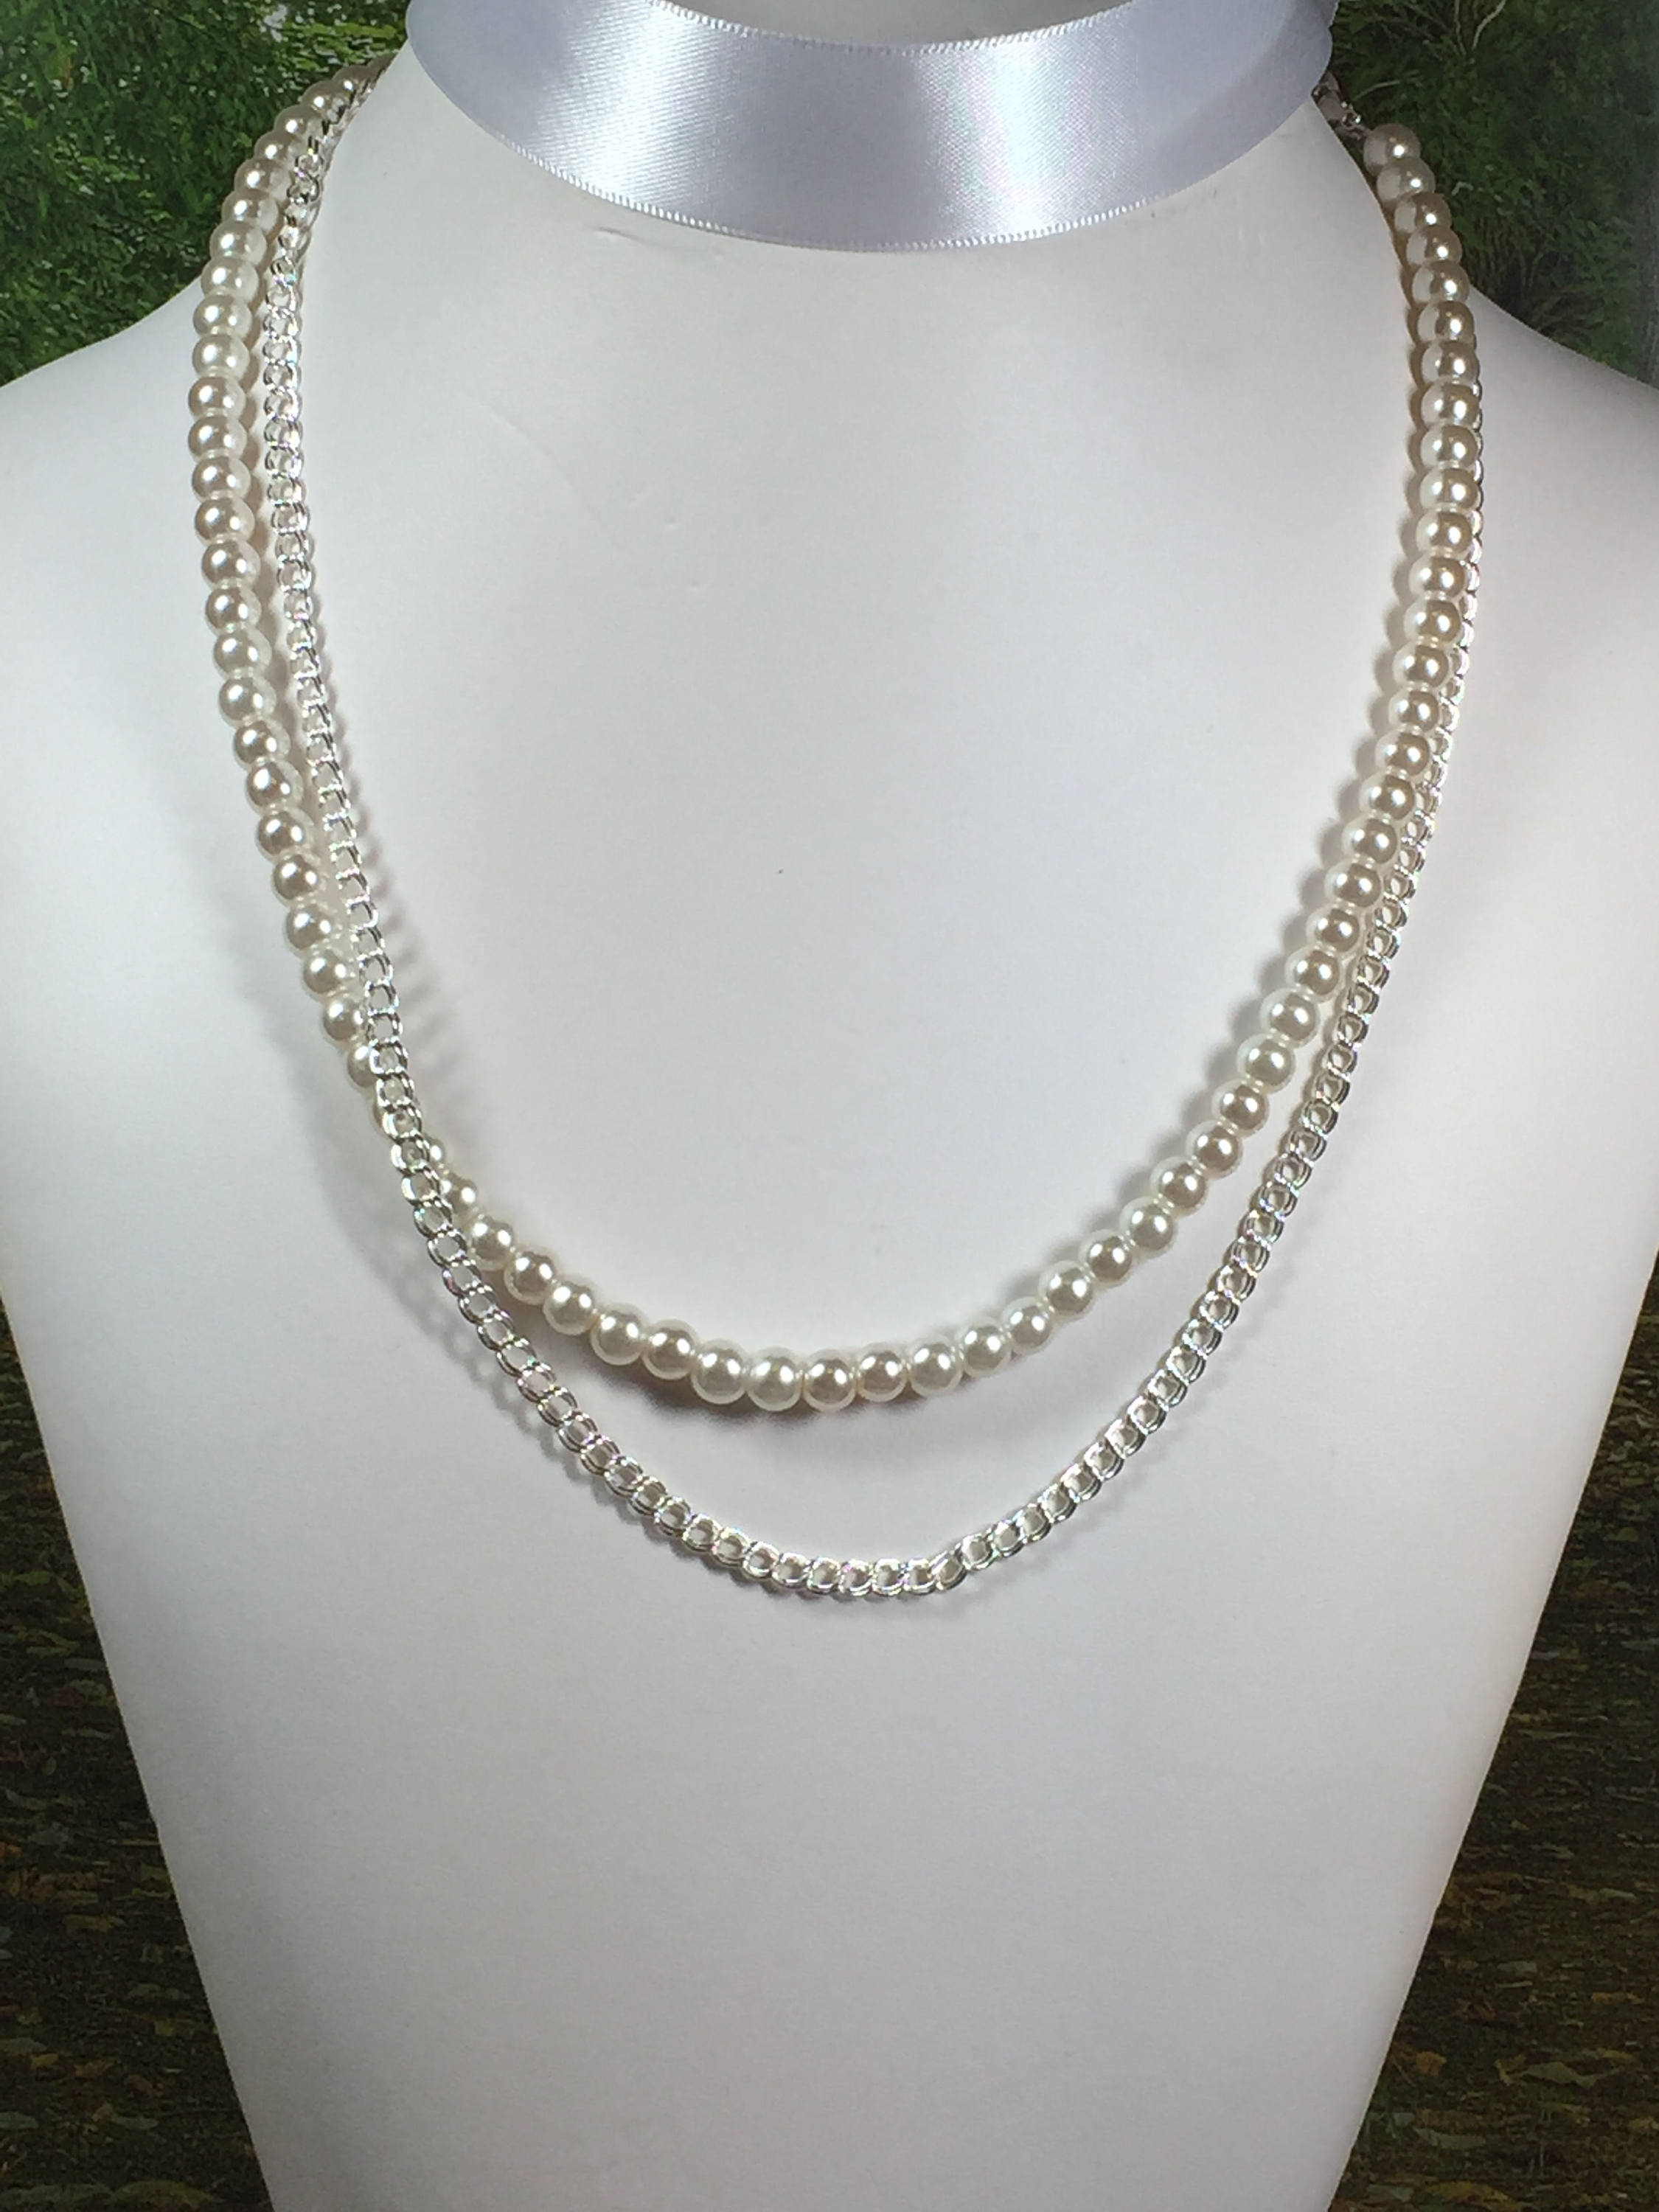 Pearls and Chains Necklace Interchangable Muli Strand Pearl Necklace ...